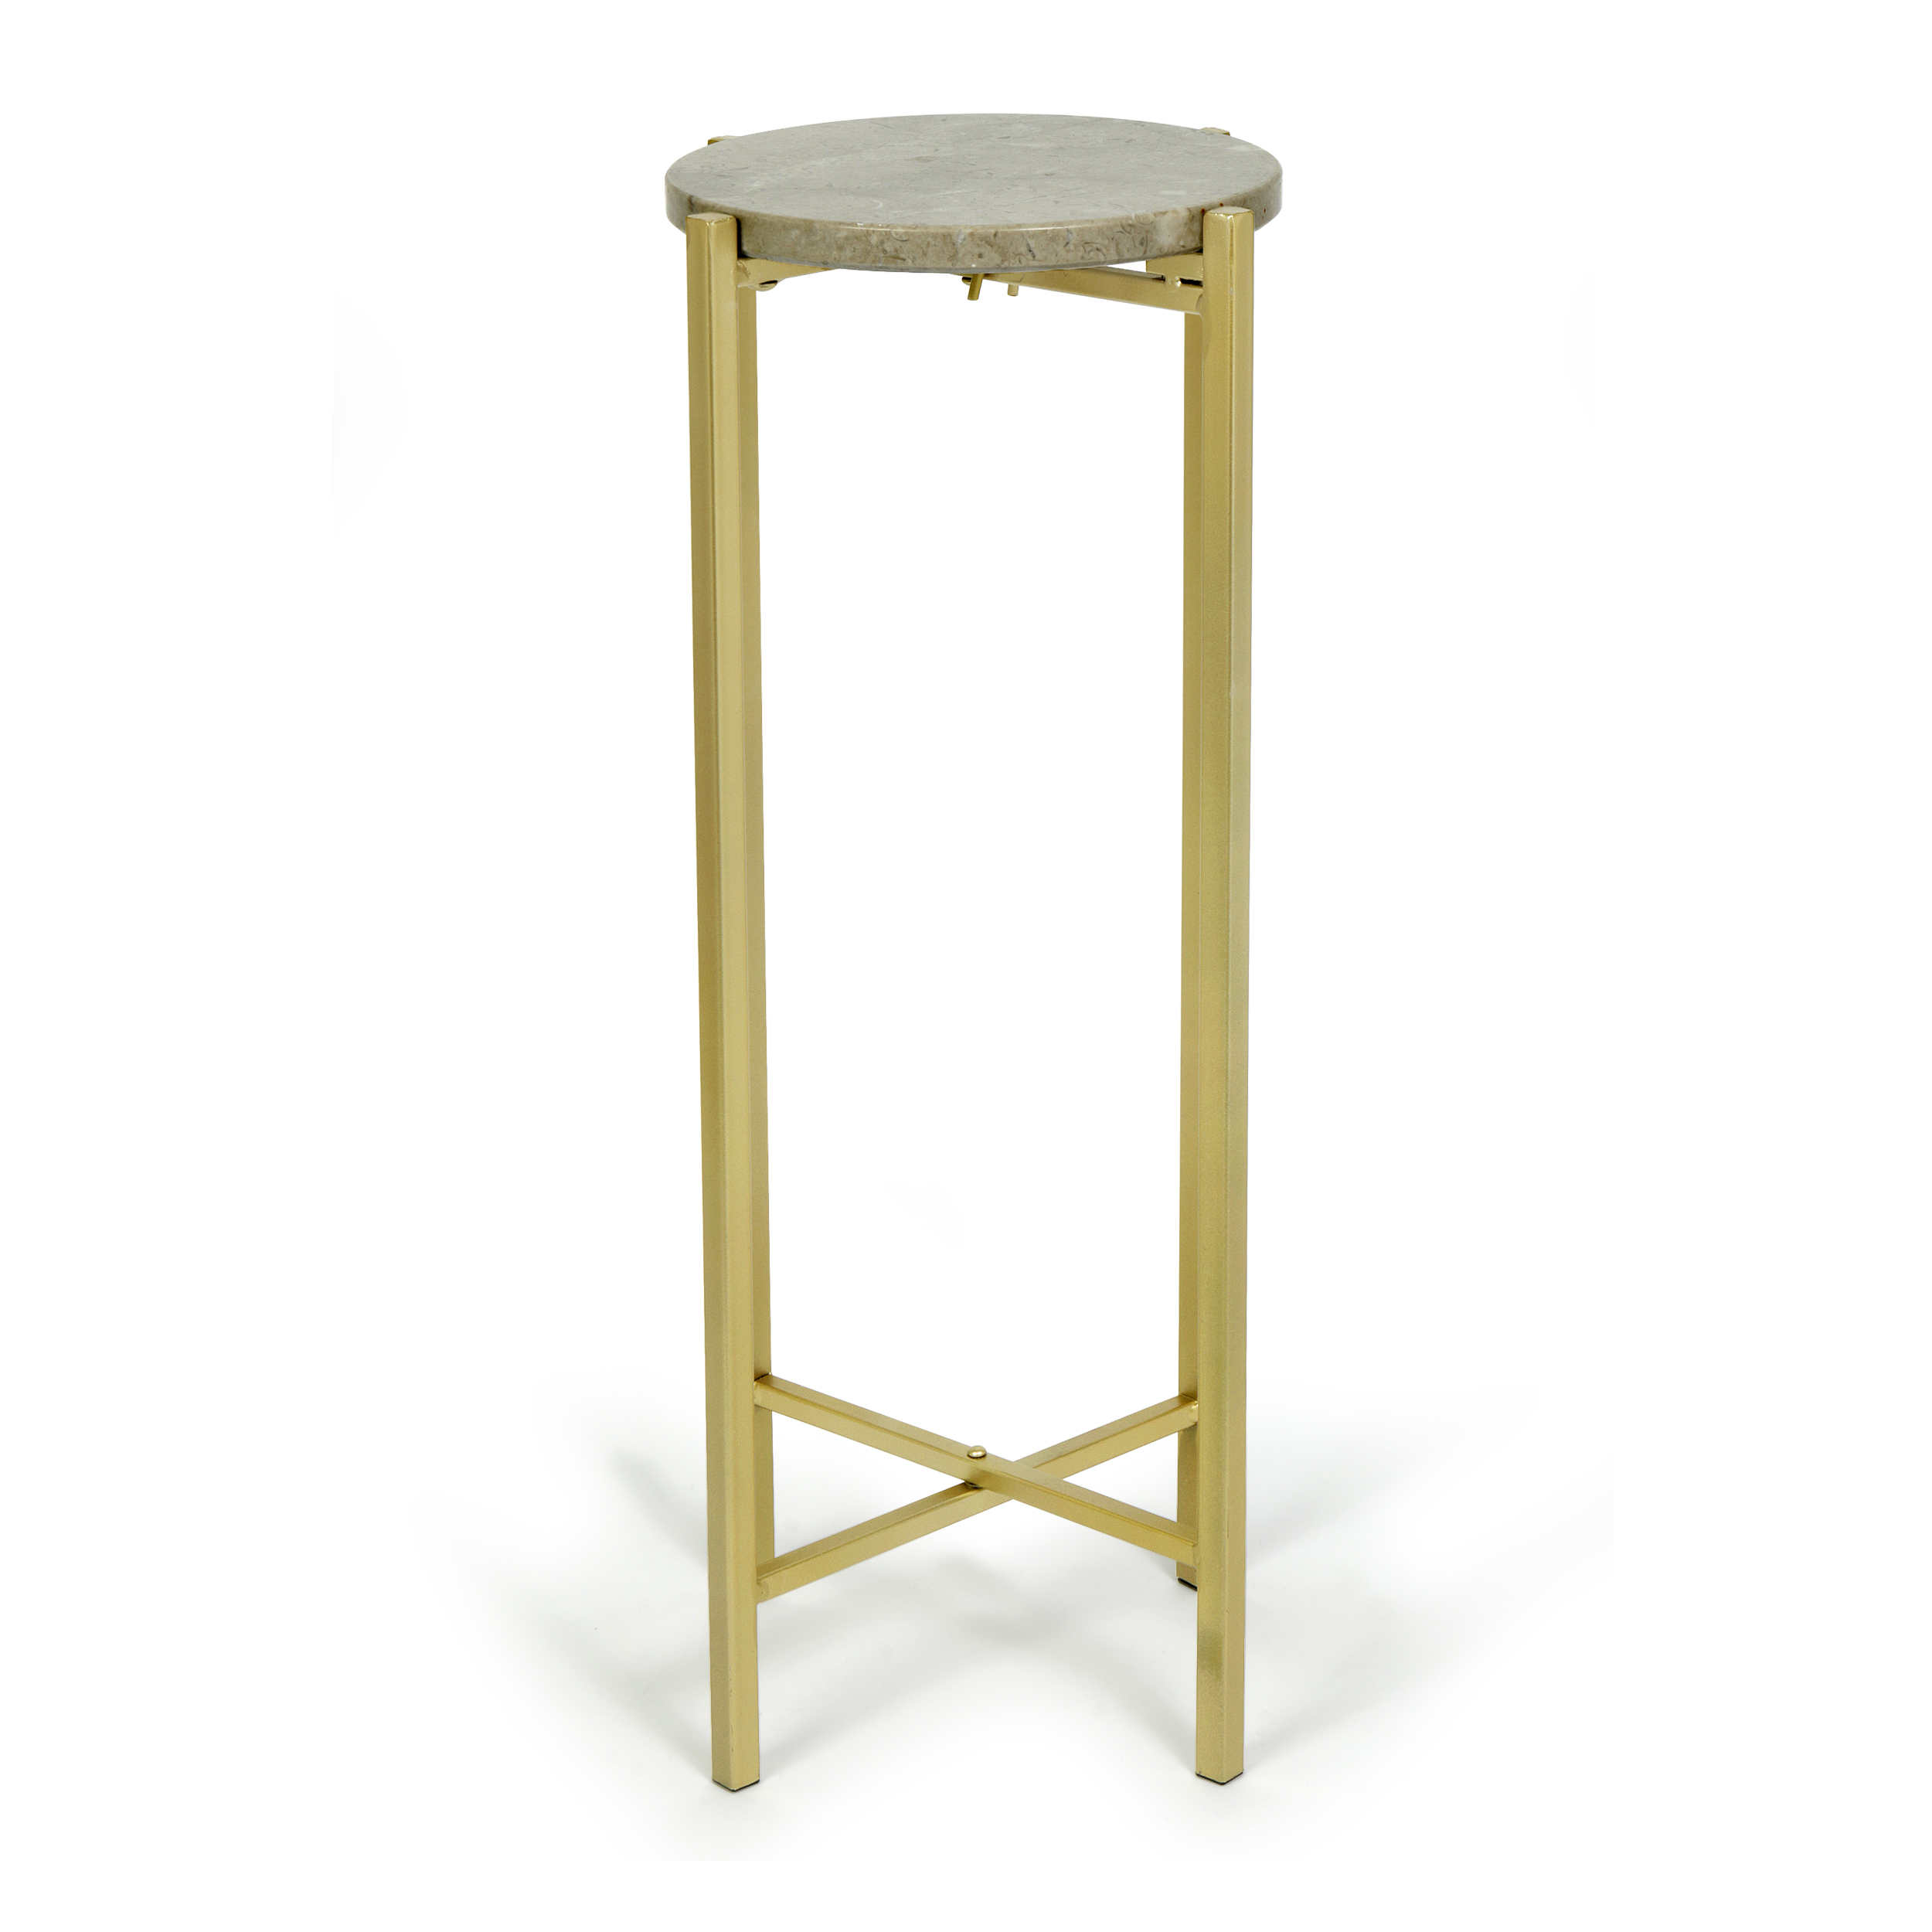 Pop Shop Brown Marble Collapsible Drink Table - image 1 of 3